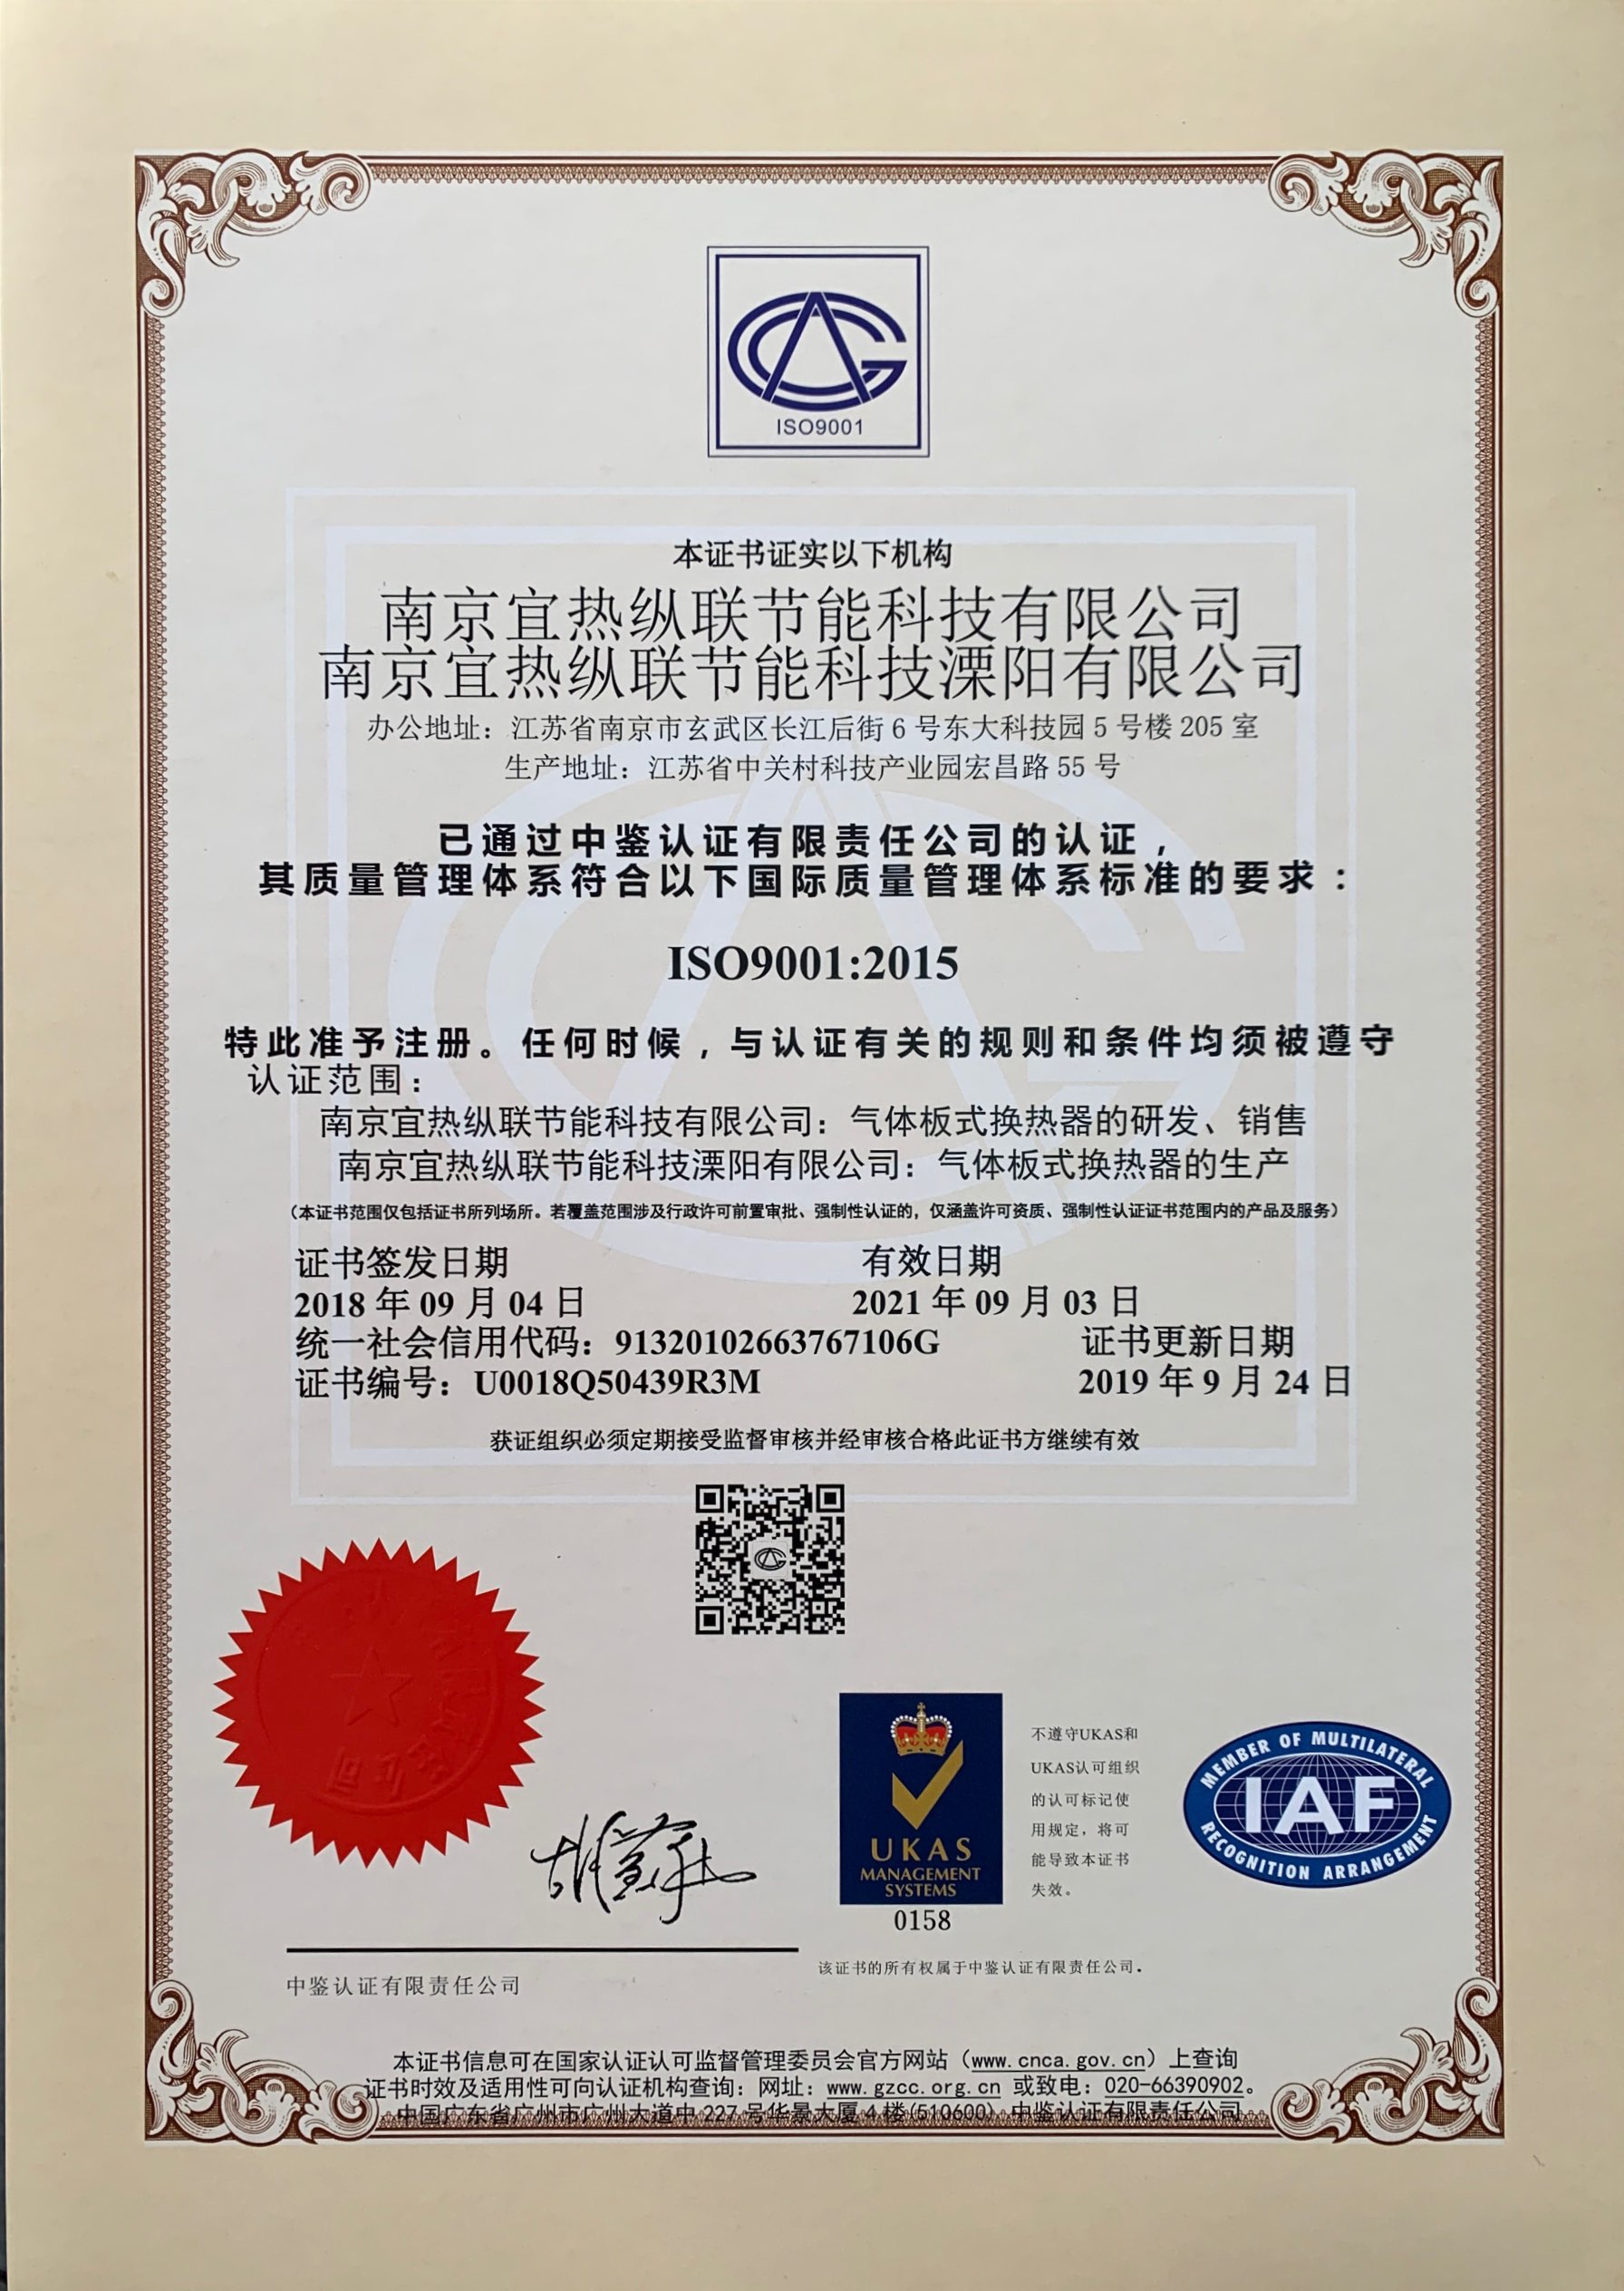 ISO9001:2015 Chinese certificate